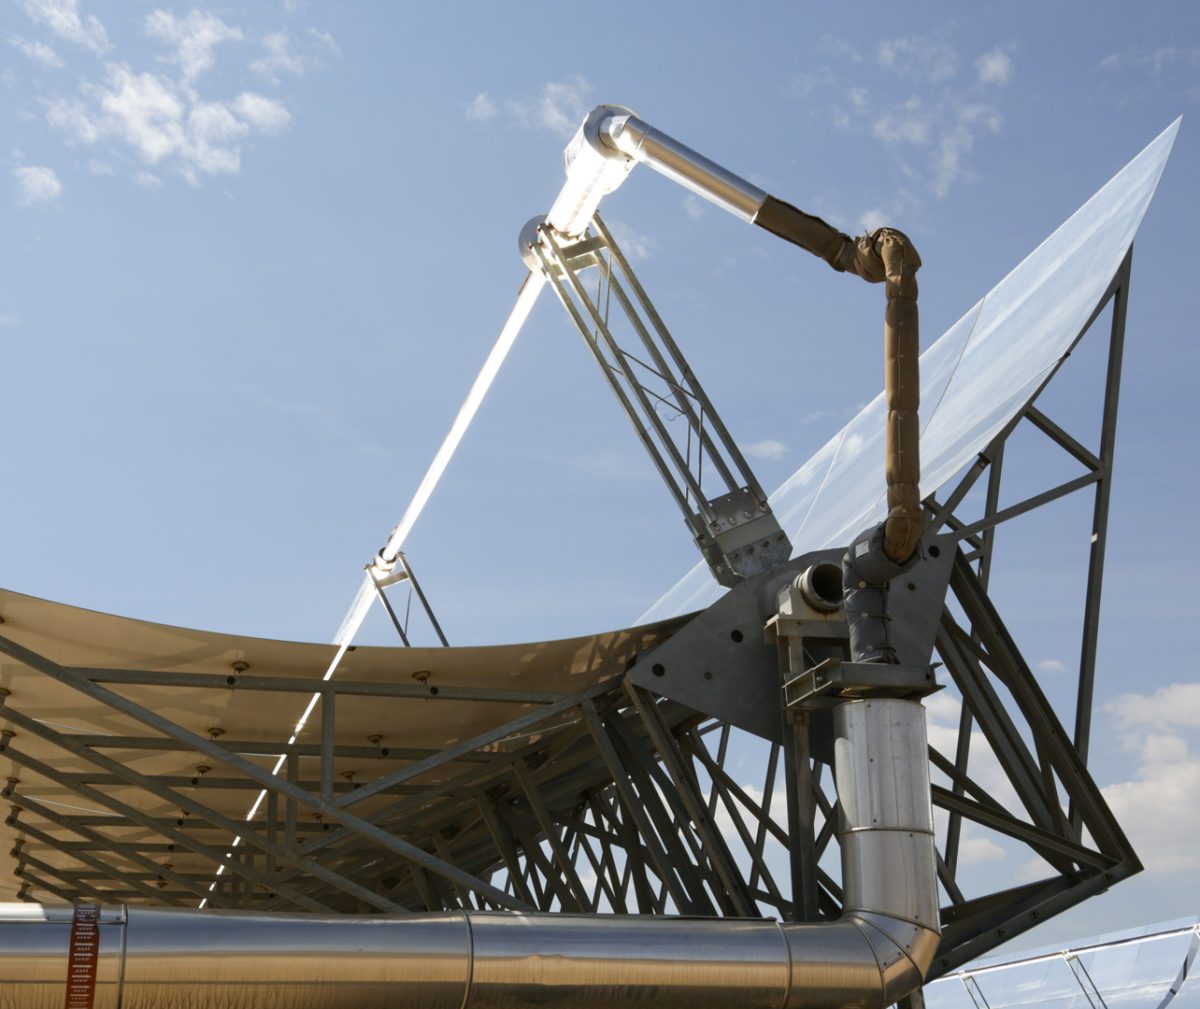 A close-up of a parabolic trough solar collector, a type of solar thermal energy system. The structure features a large, curved reflective surface that concentrates sunlight onto a central receiver tube running along its focal line.